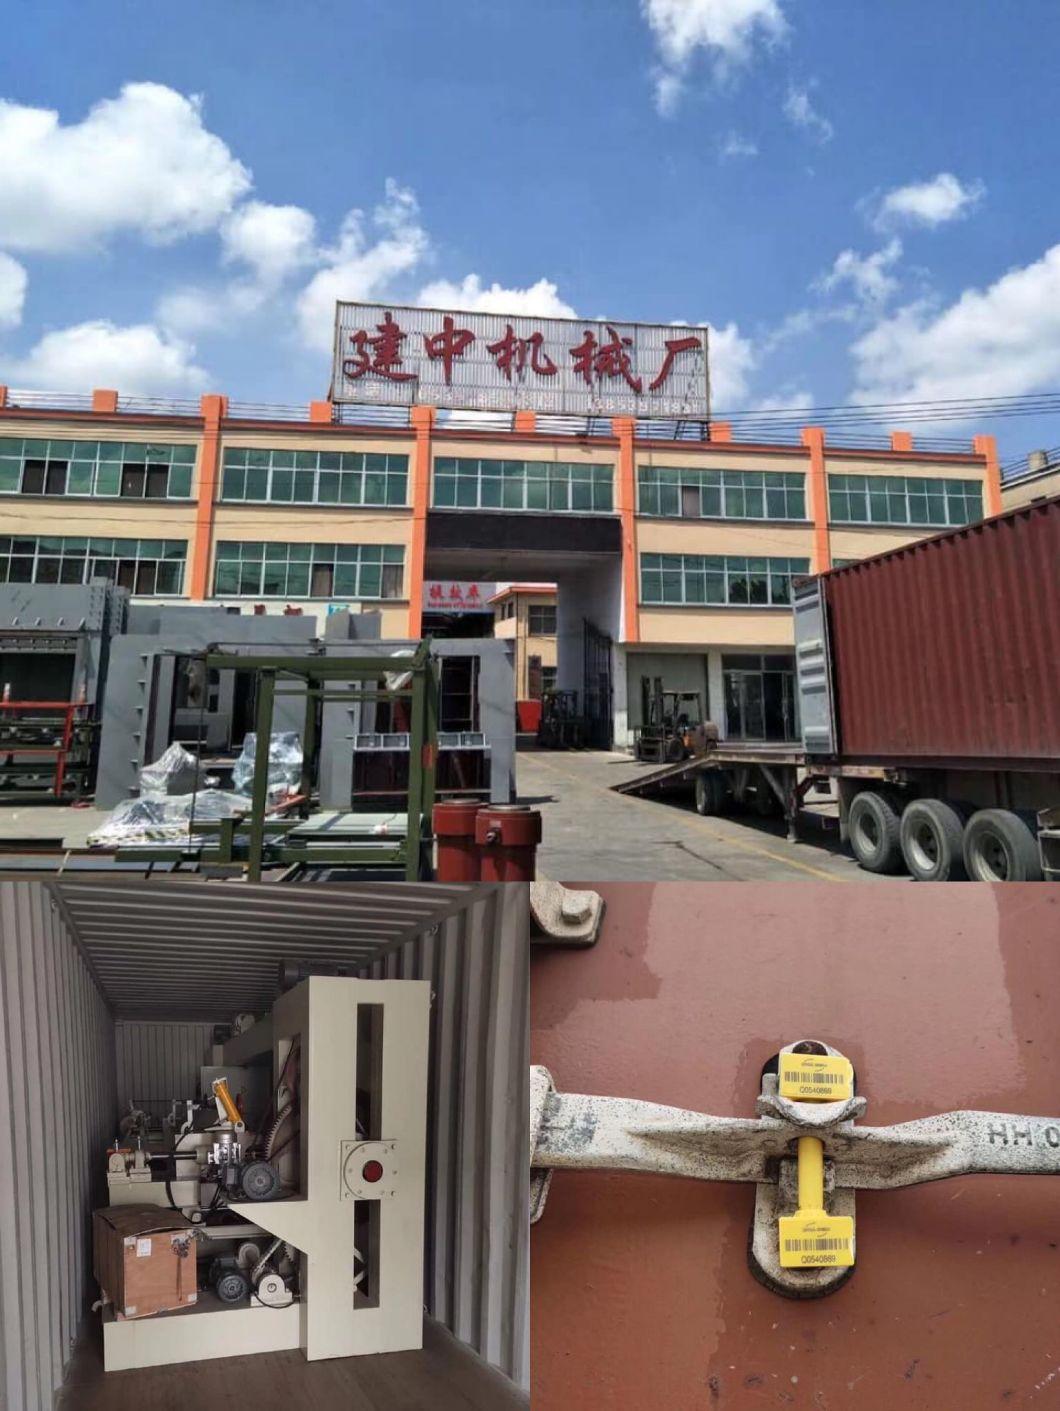 Veneer Dryer Tools/Plywood Machinery/Woodworking Device/High Quality /Ideal Price/High Quality Products Machinery/Dryer Machinery